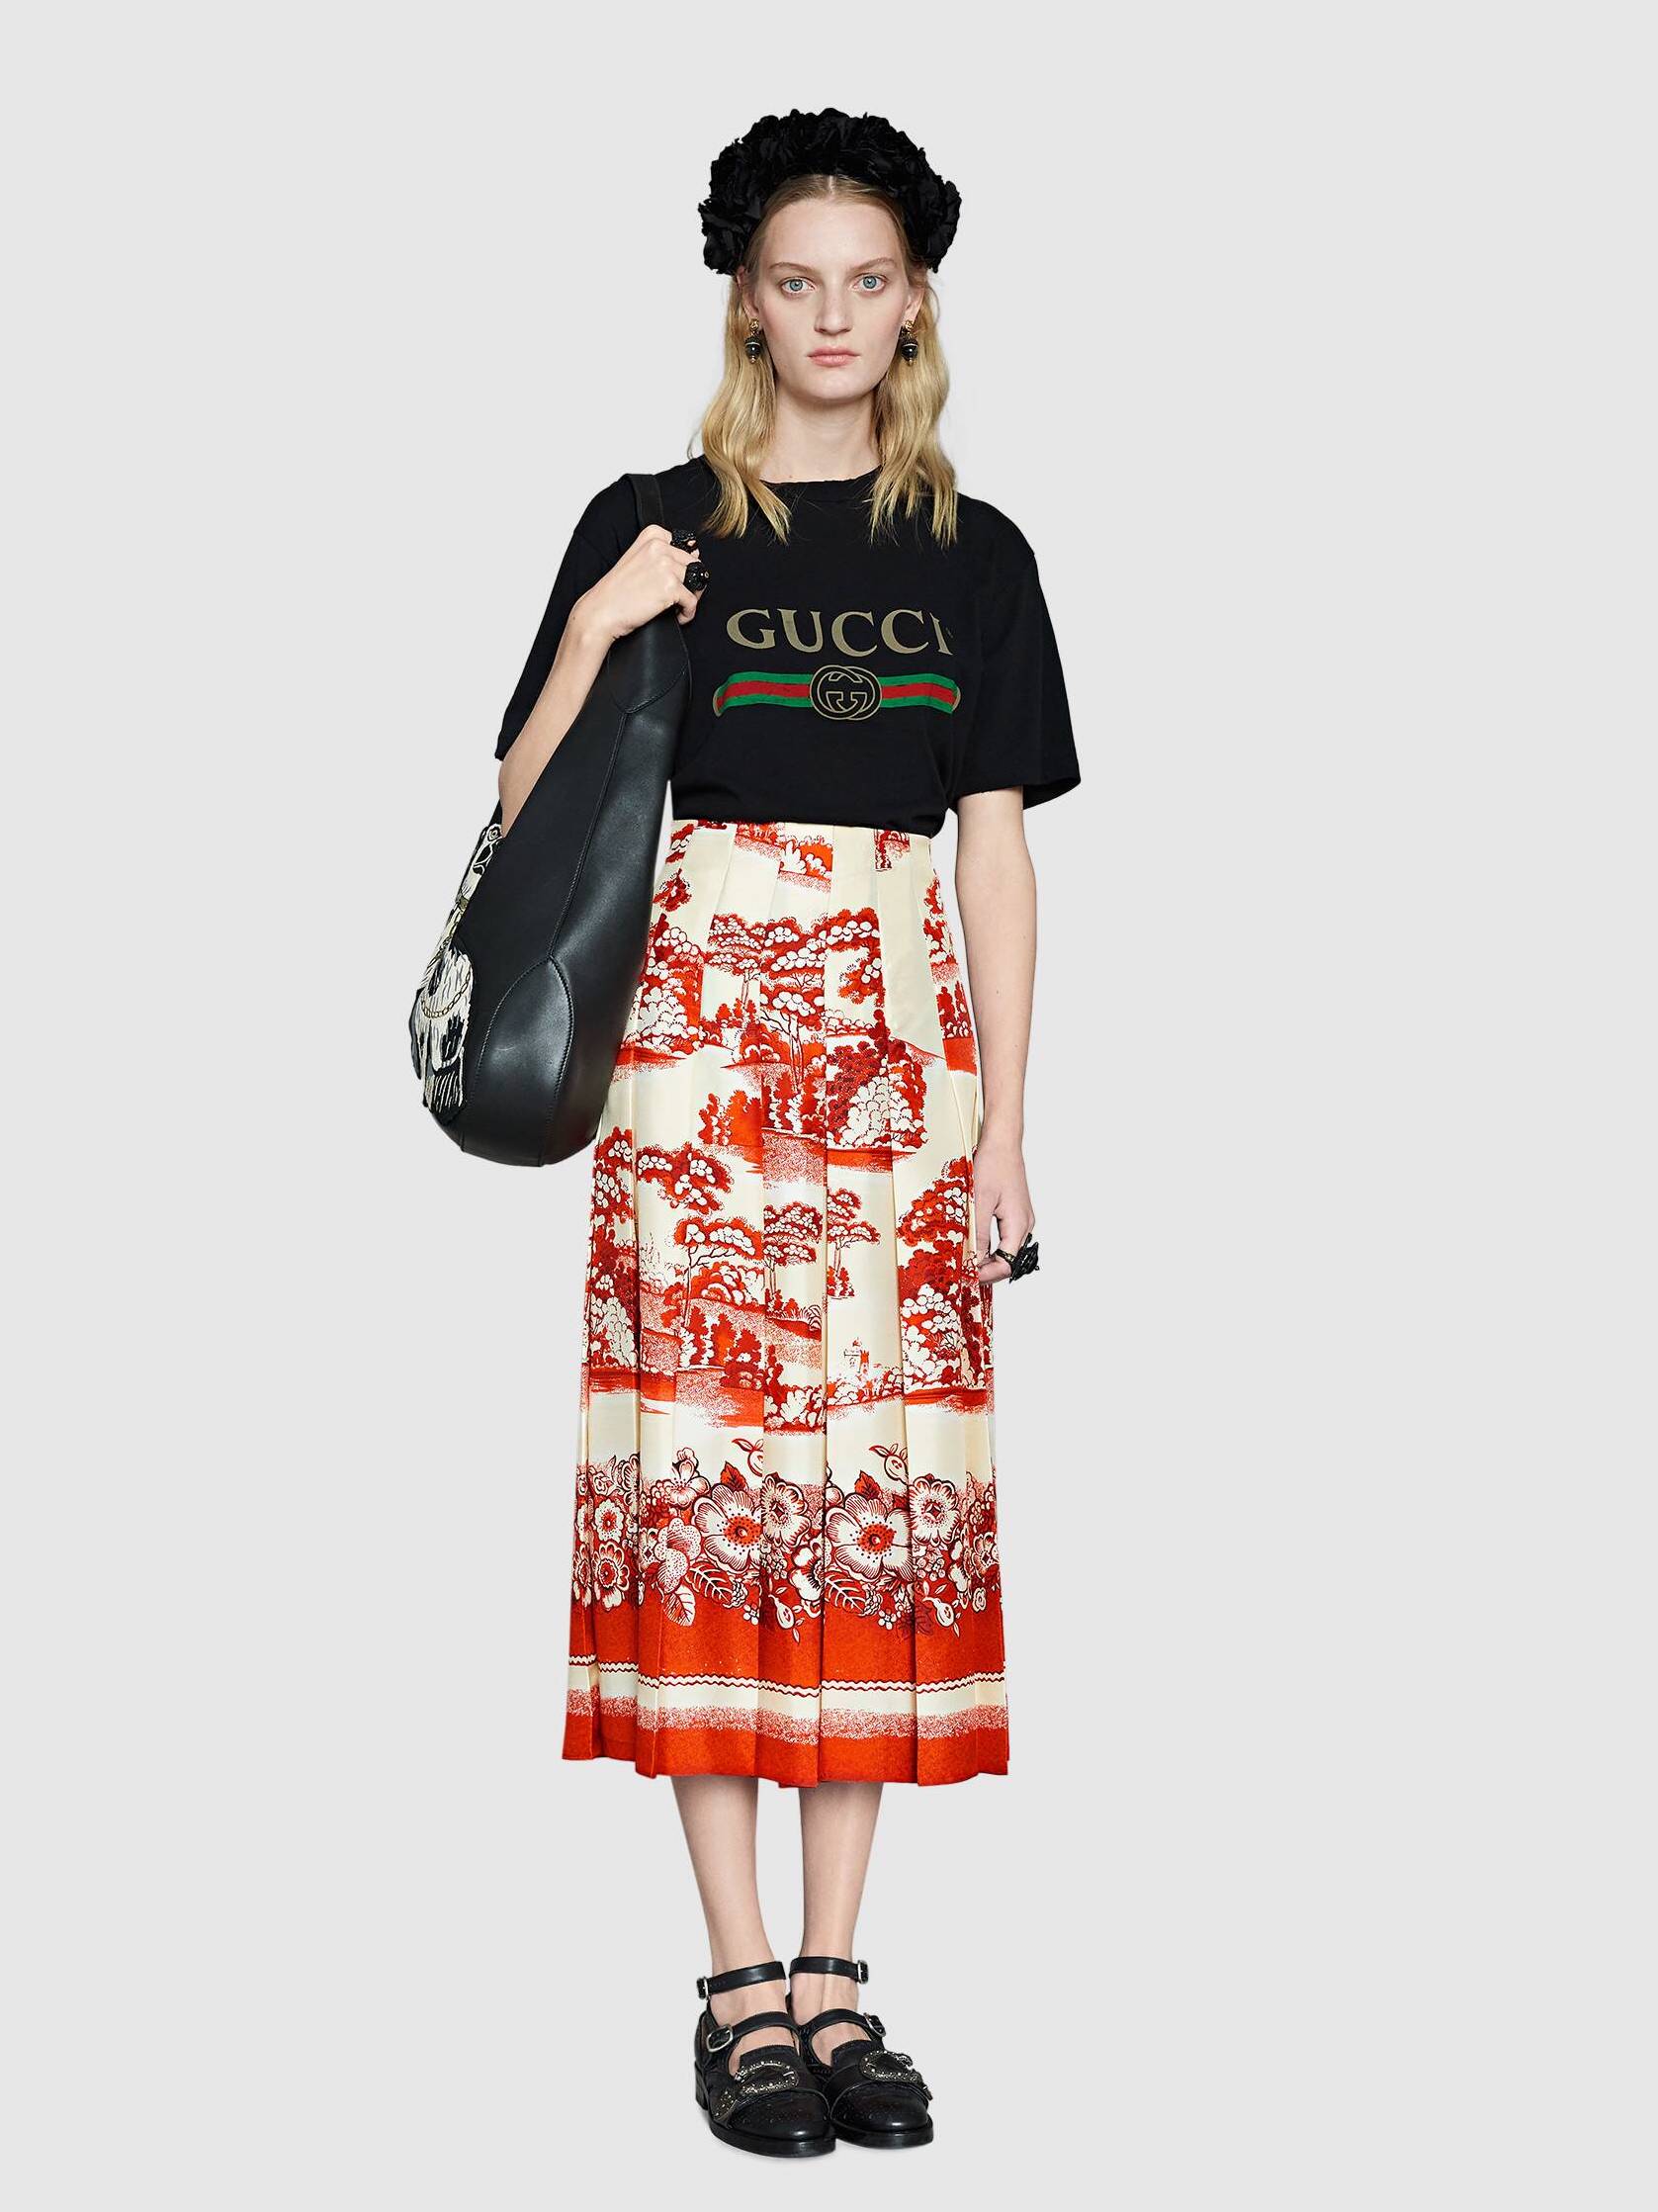 How to wear a vintage gucci logo t-shirt • The Fashion Fuse